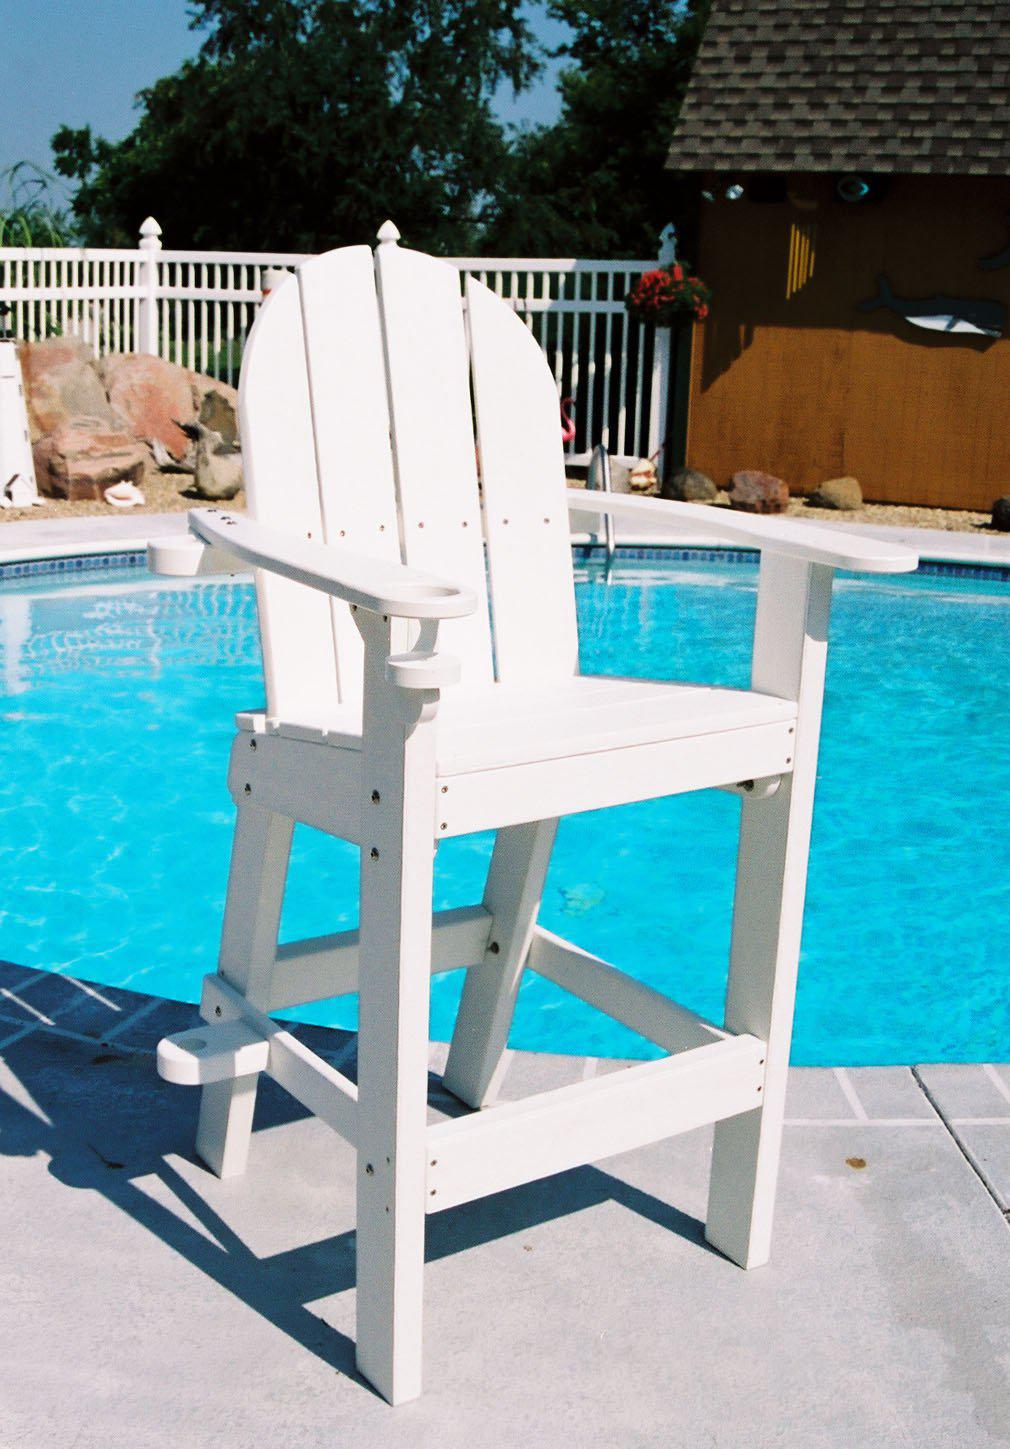 Tailwind Furniture Recycled Plastic Small Lifeguard Chair - LG-500 - Seat Height: 30" - LEAD TIME TO SHIP 10 TO 12 BUSINESS DAYS